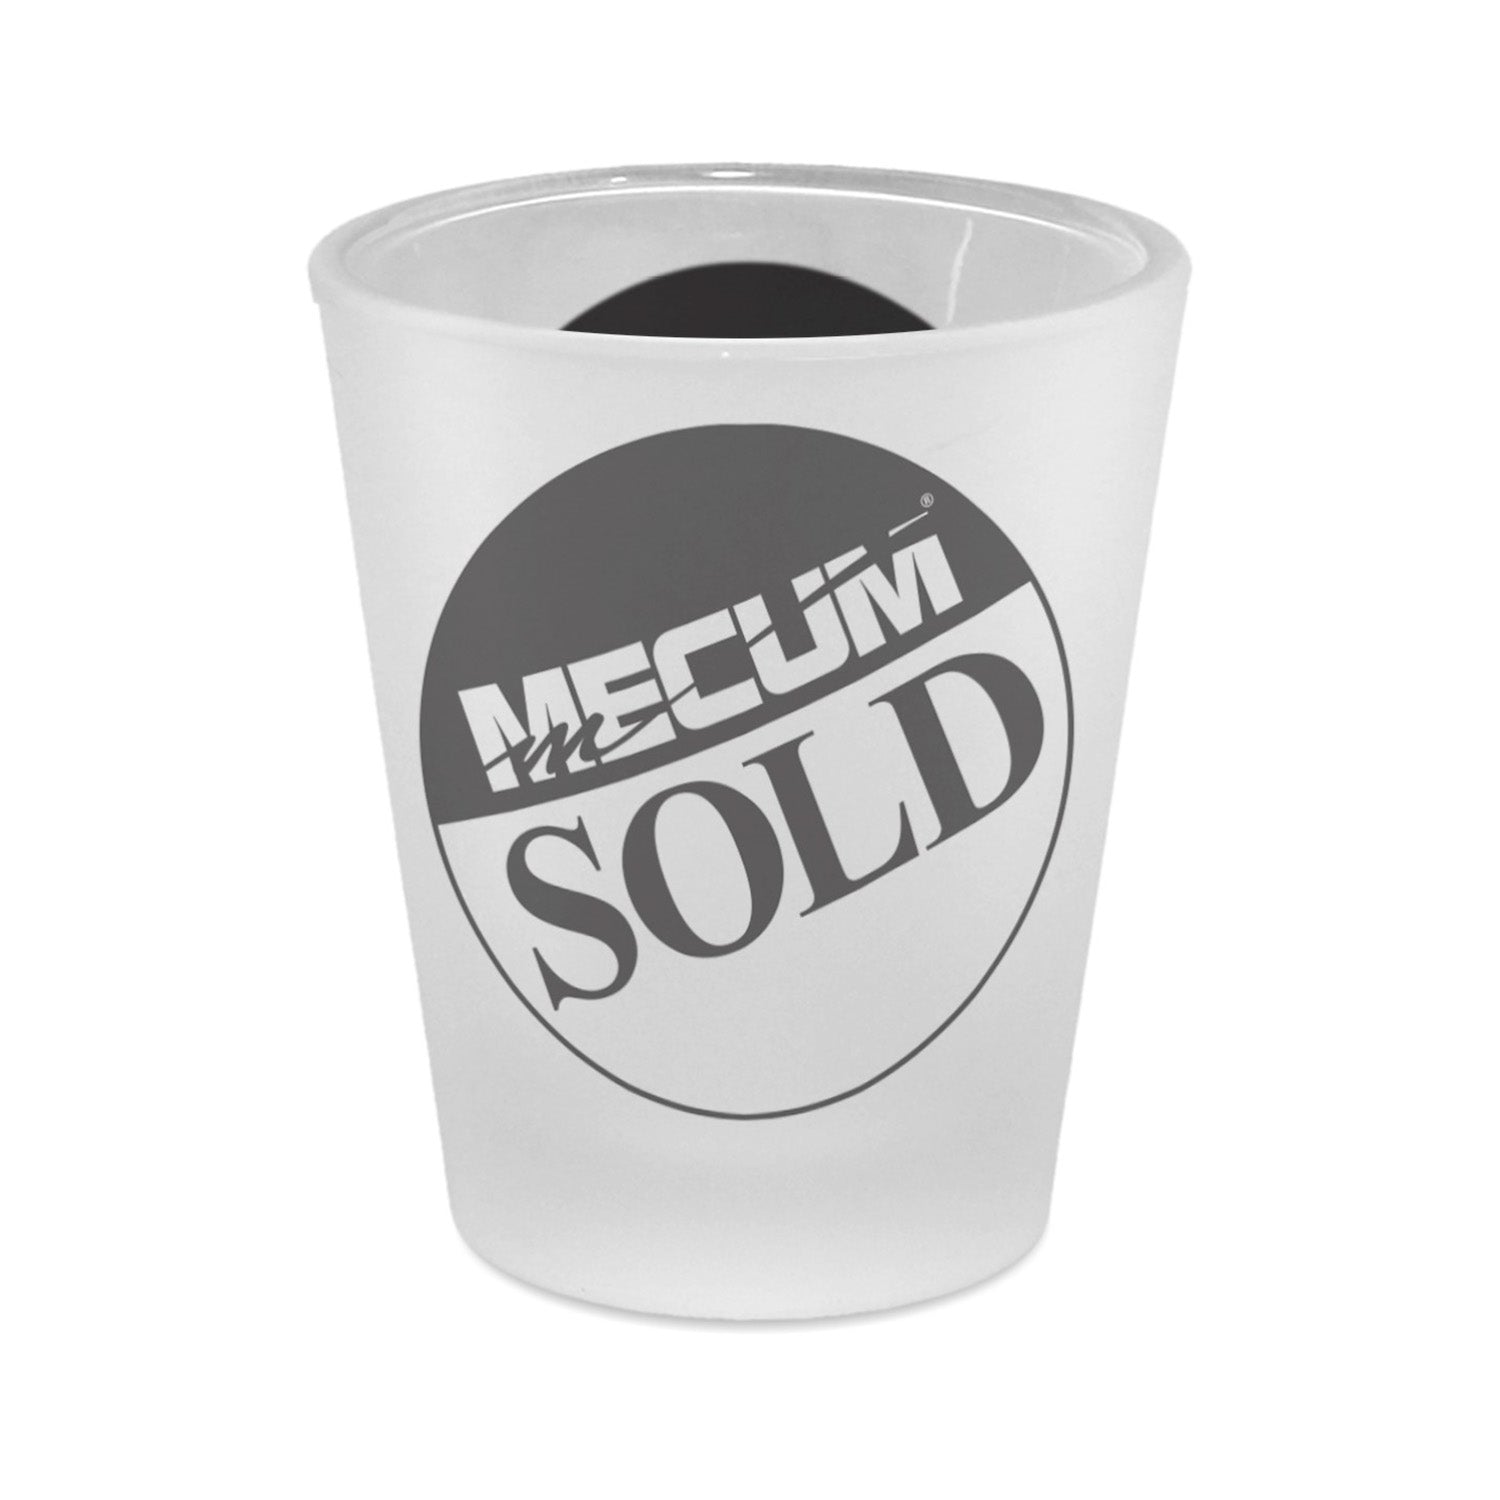 Mecum Auction Frosted Shot Glass - Front View